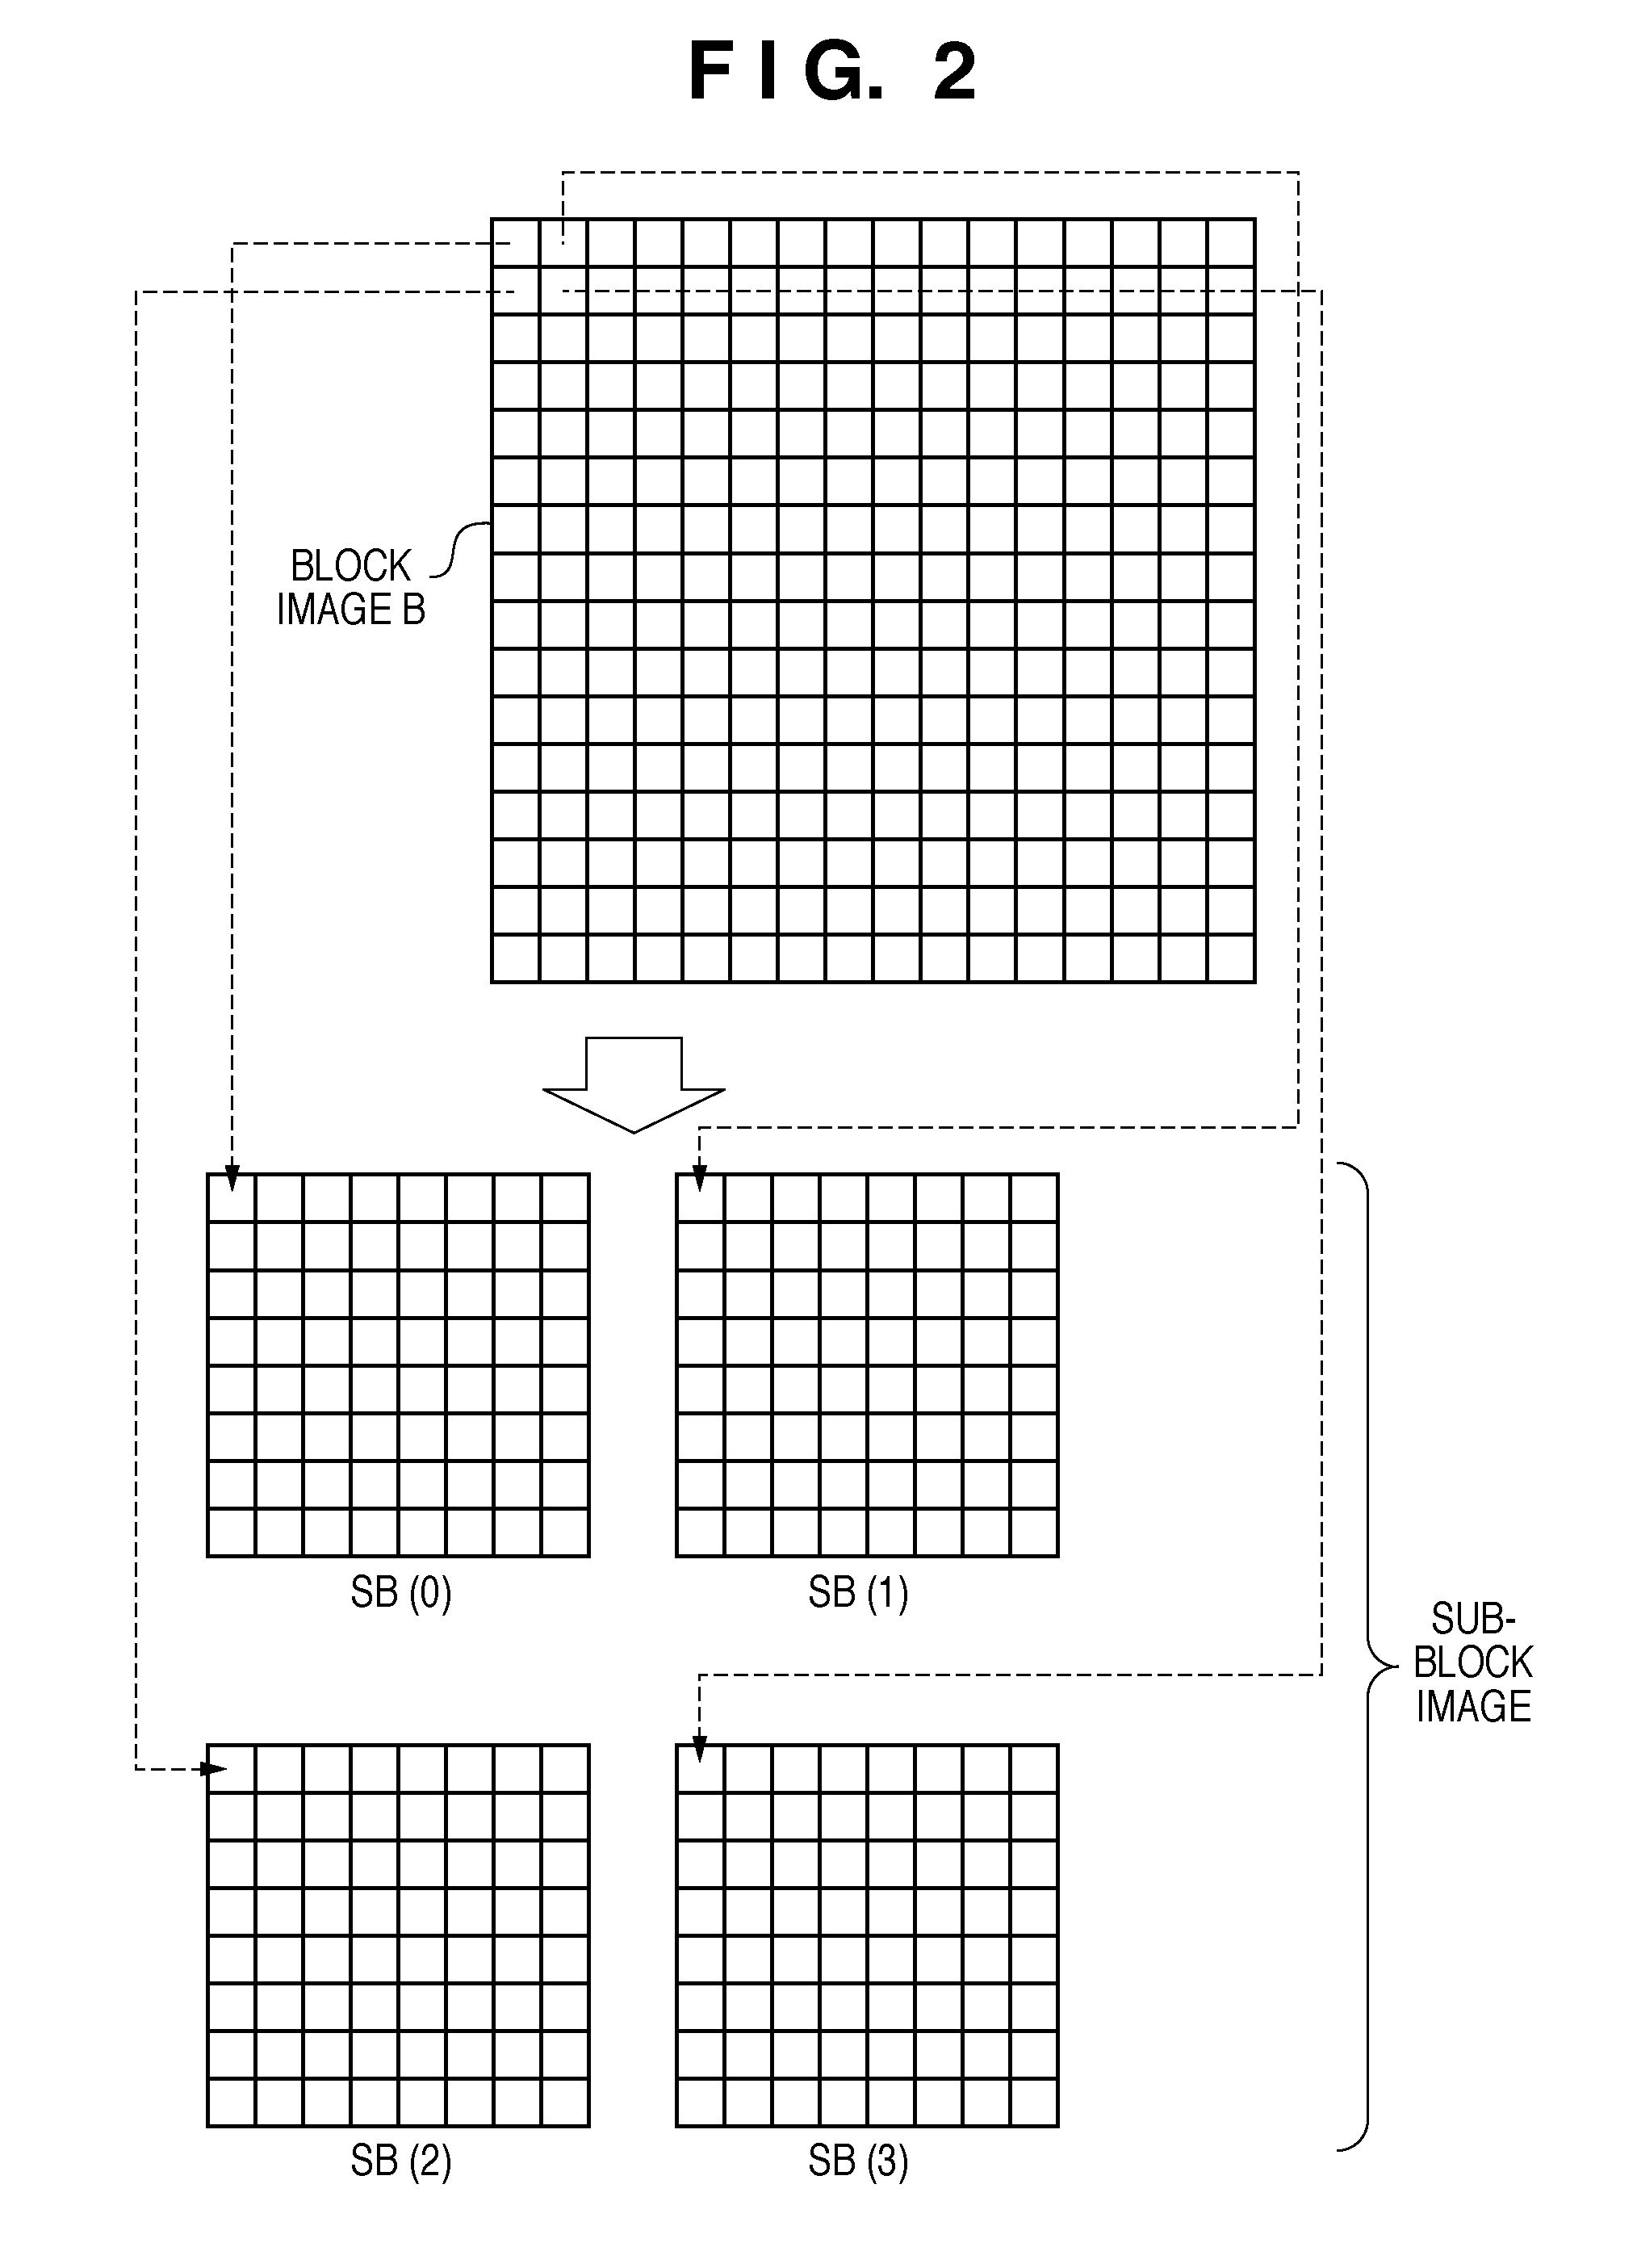 Image encoding apparatus, image decoding apparatus, and control method therefor